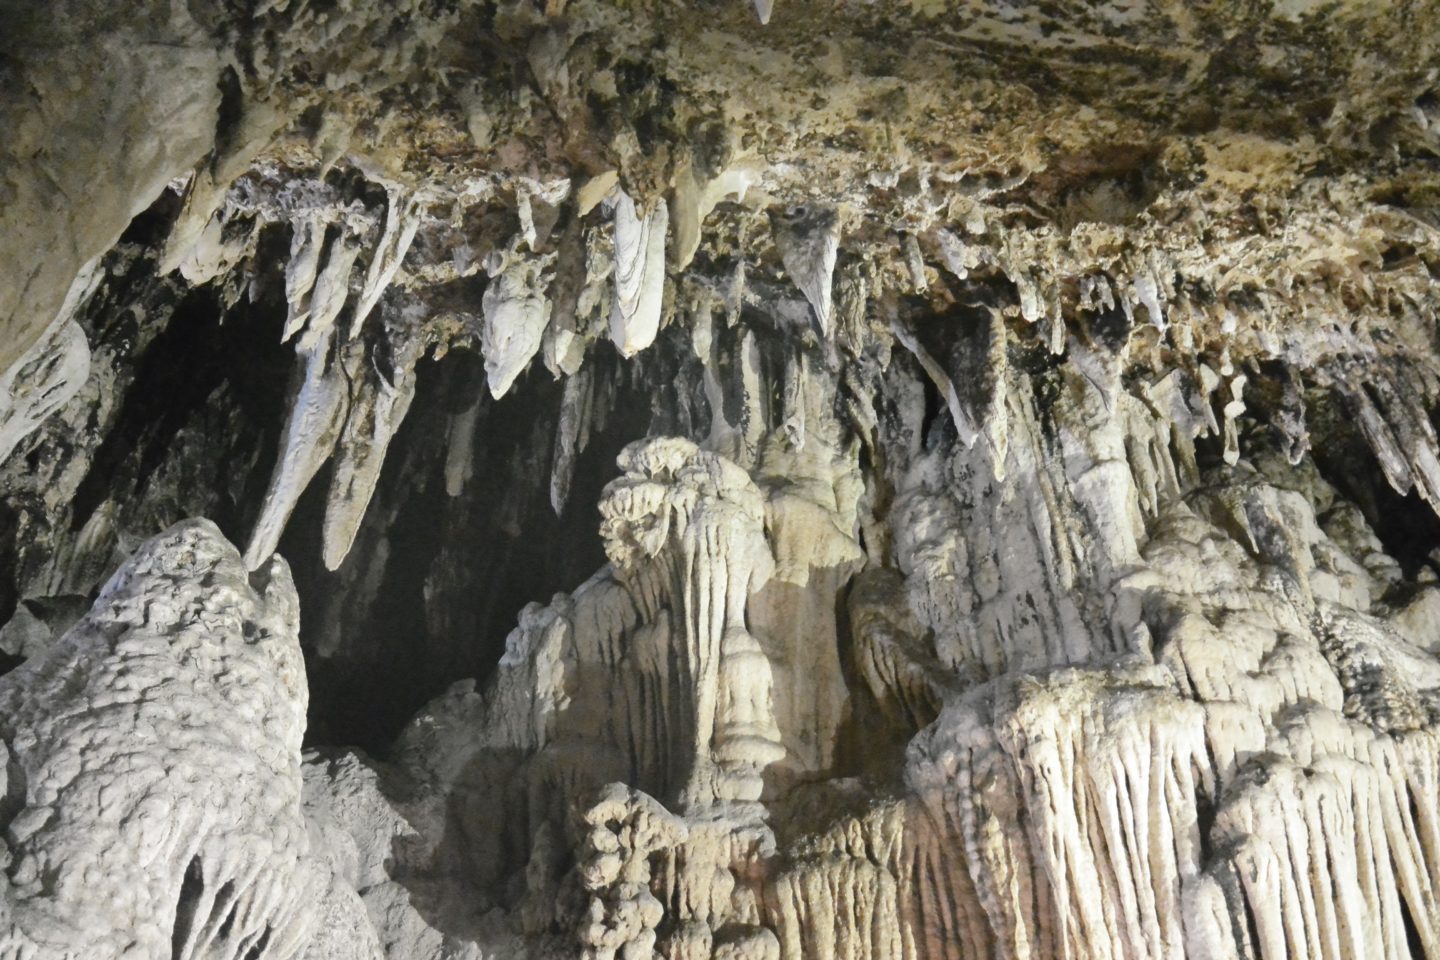 inside Lung Khuy cave